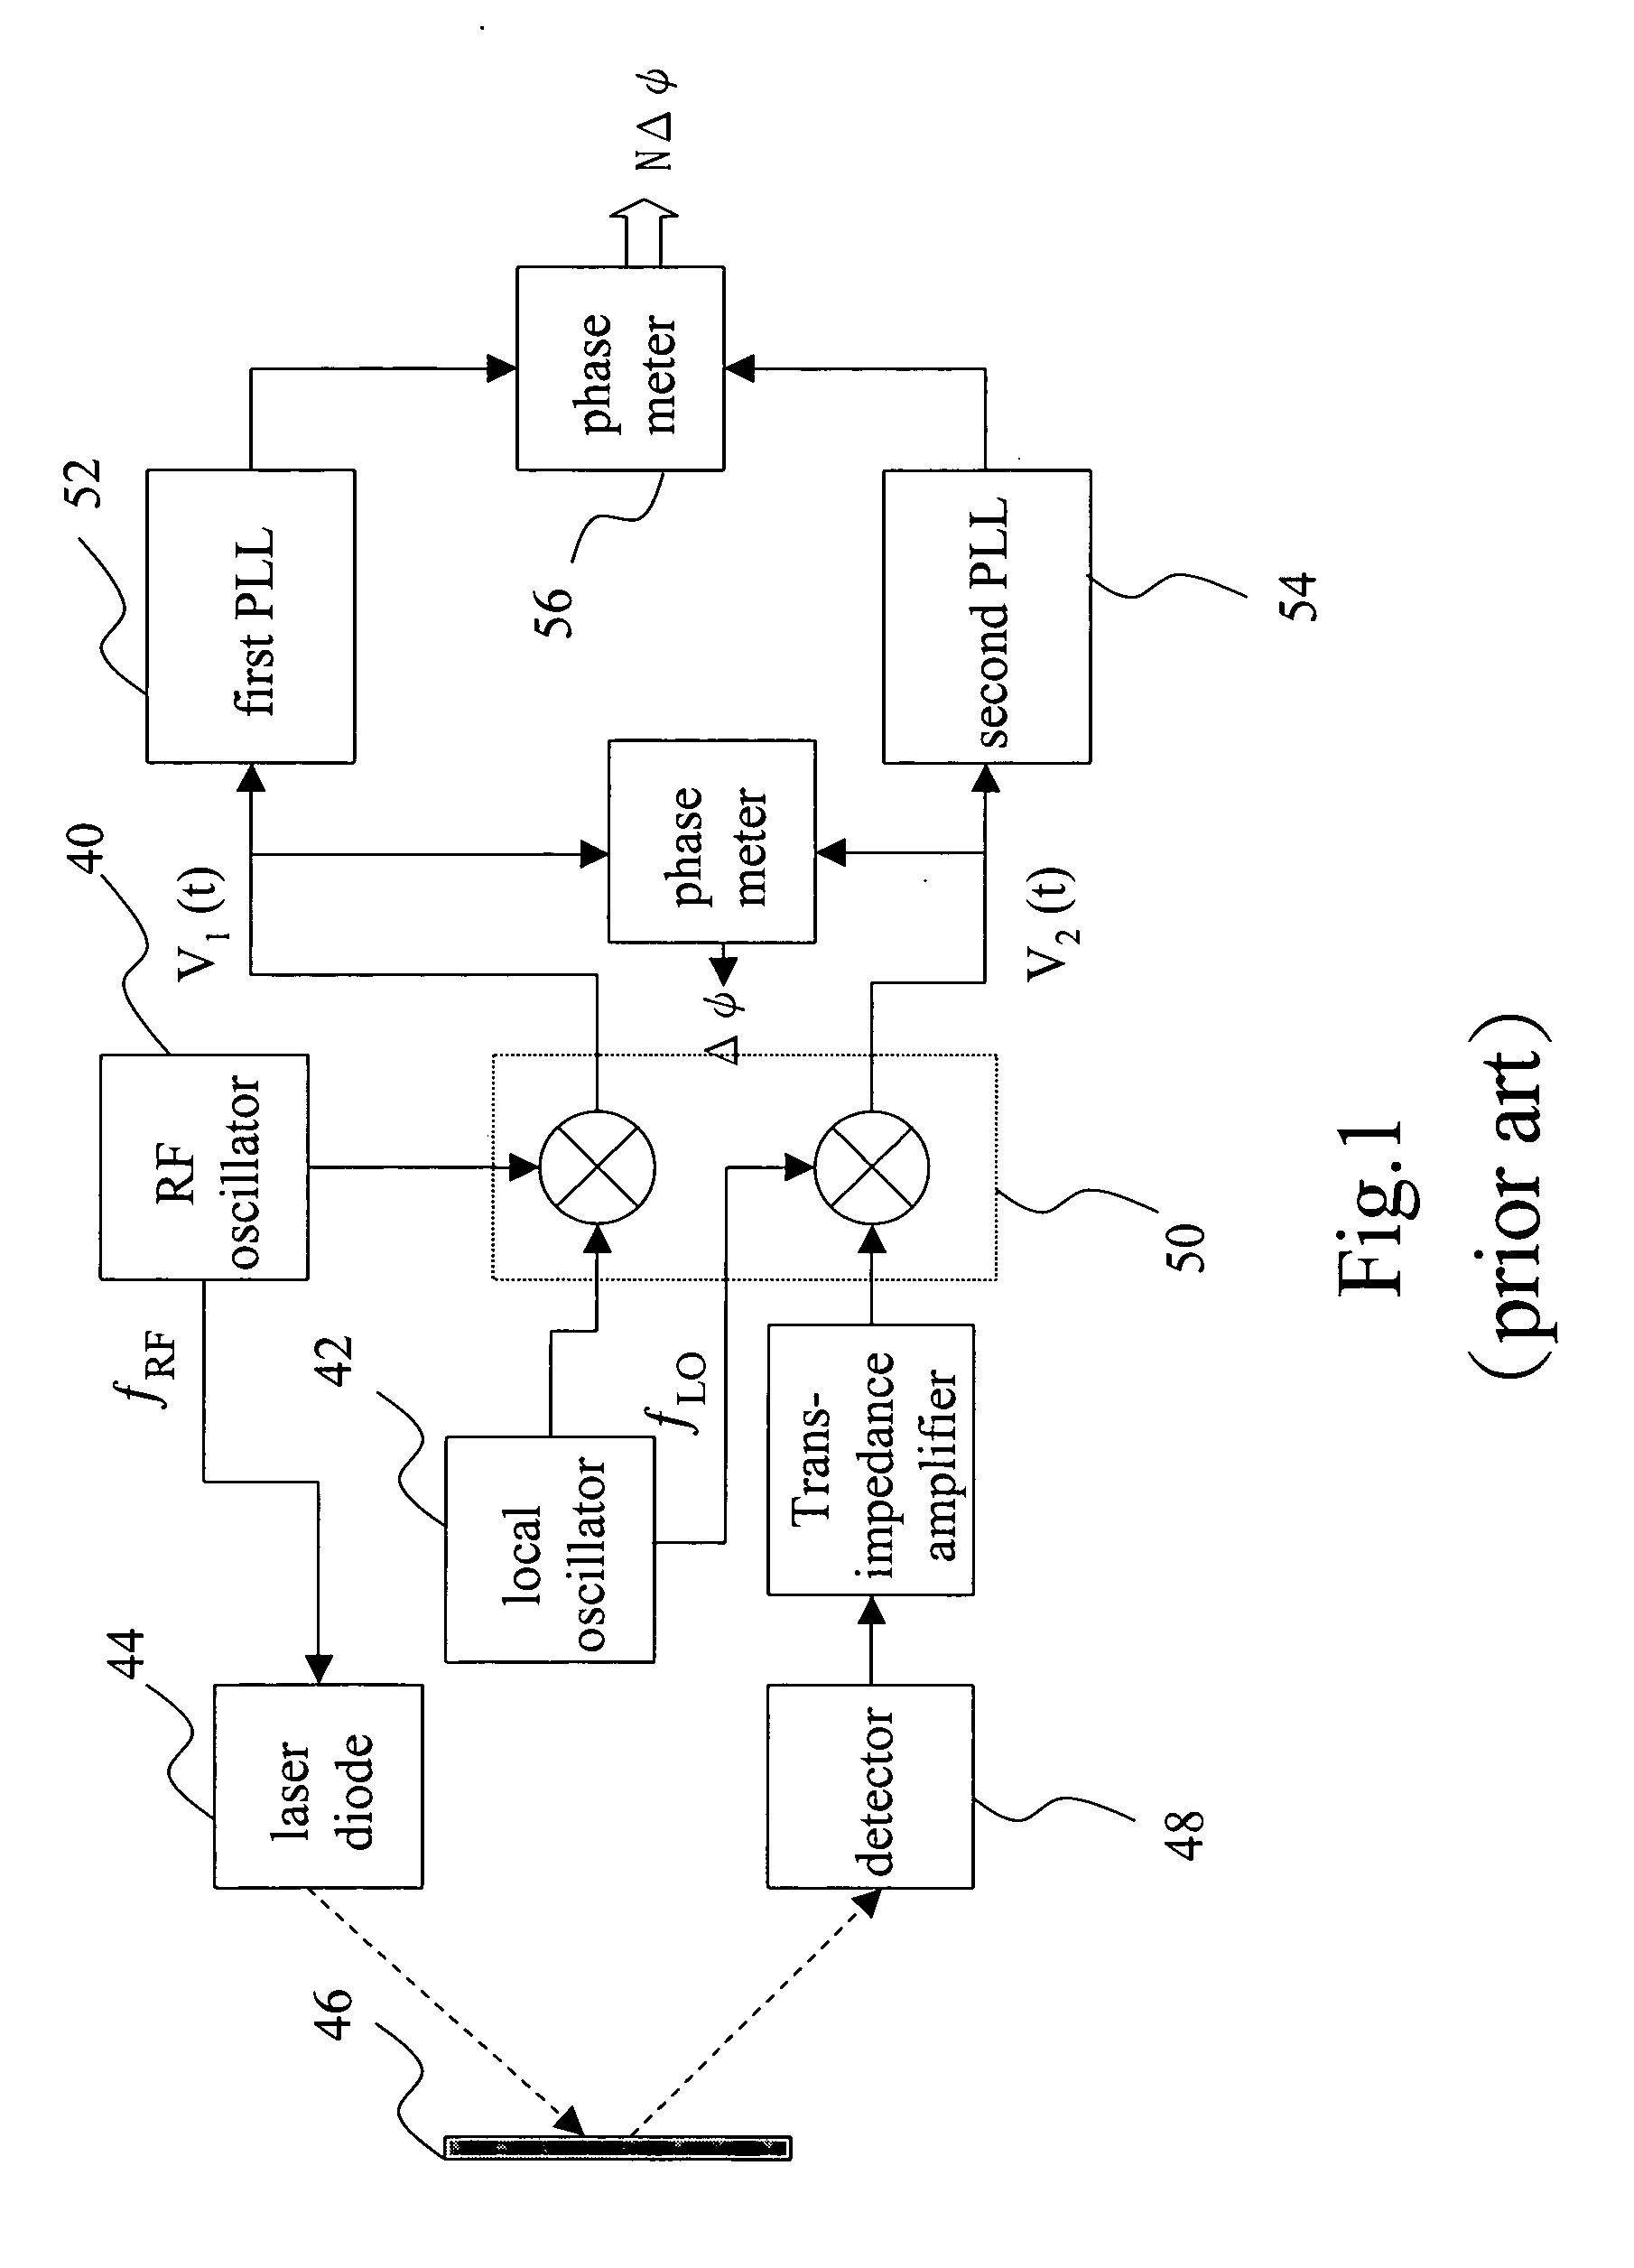 Multi-modulation frequency laser range finder and method for the same